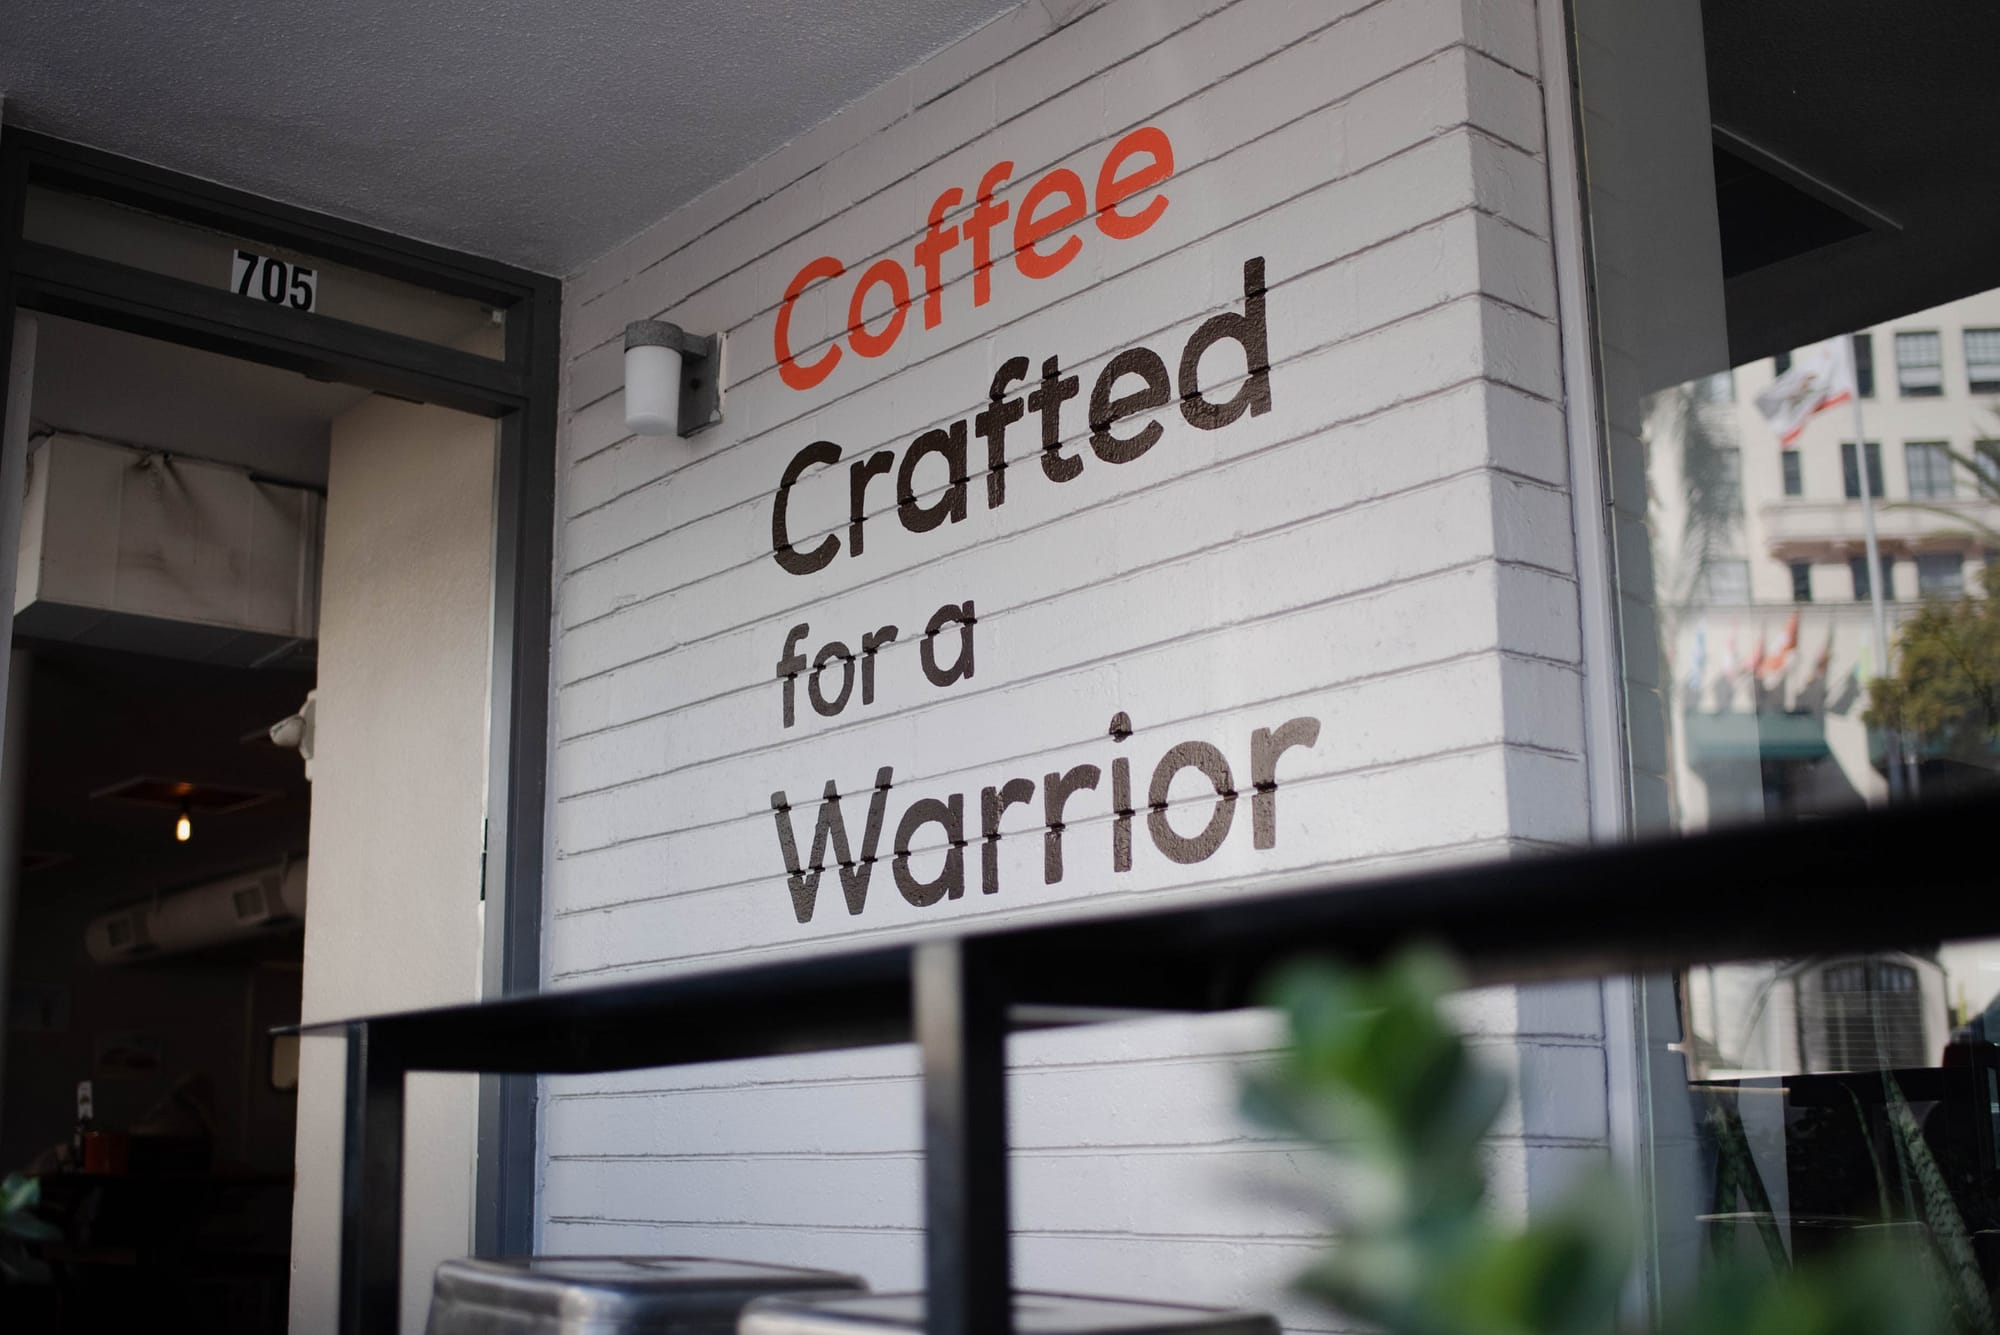 Achilles Coffee Roasters - Coffee Crafted for a Warrior